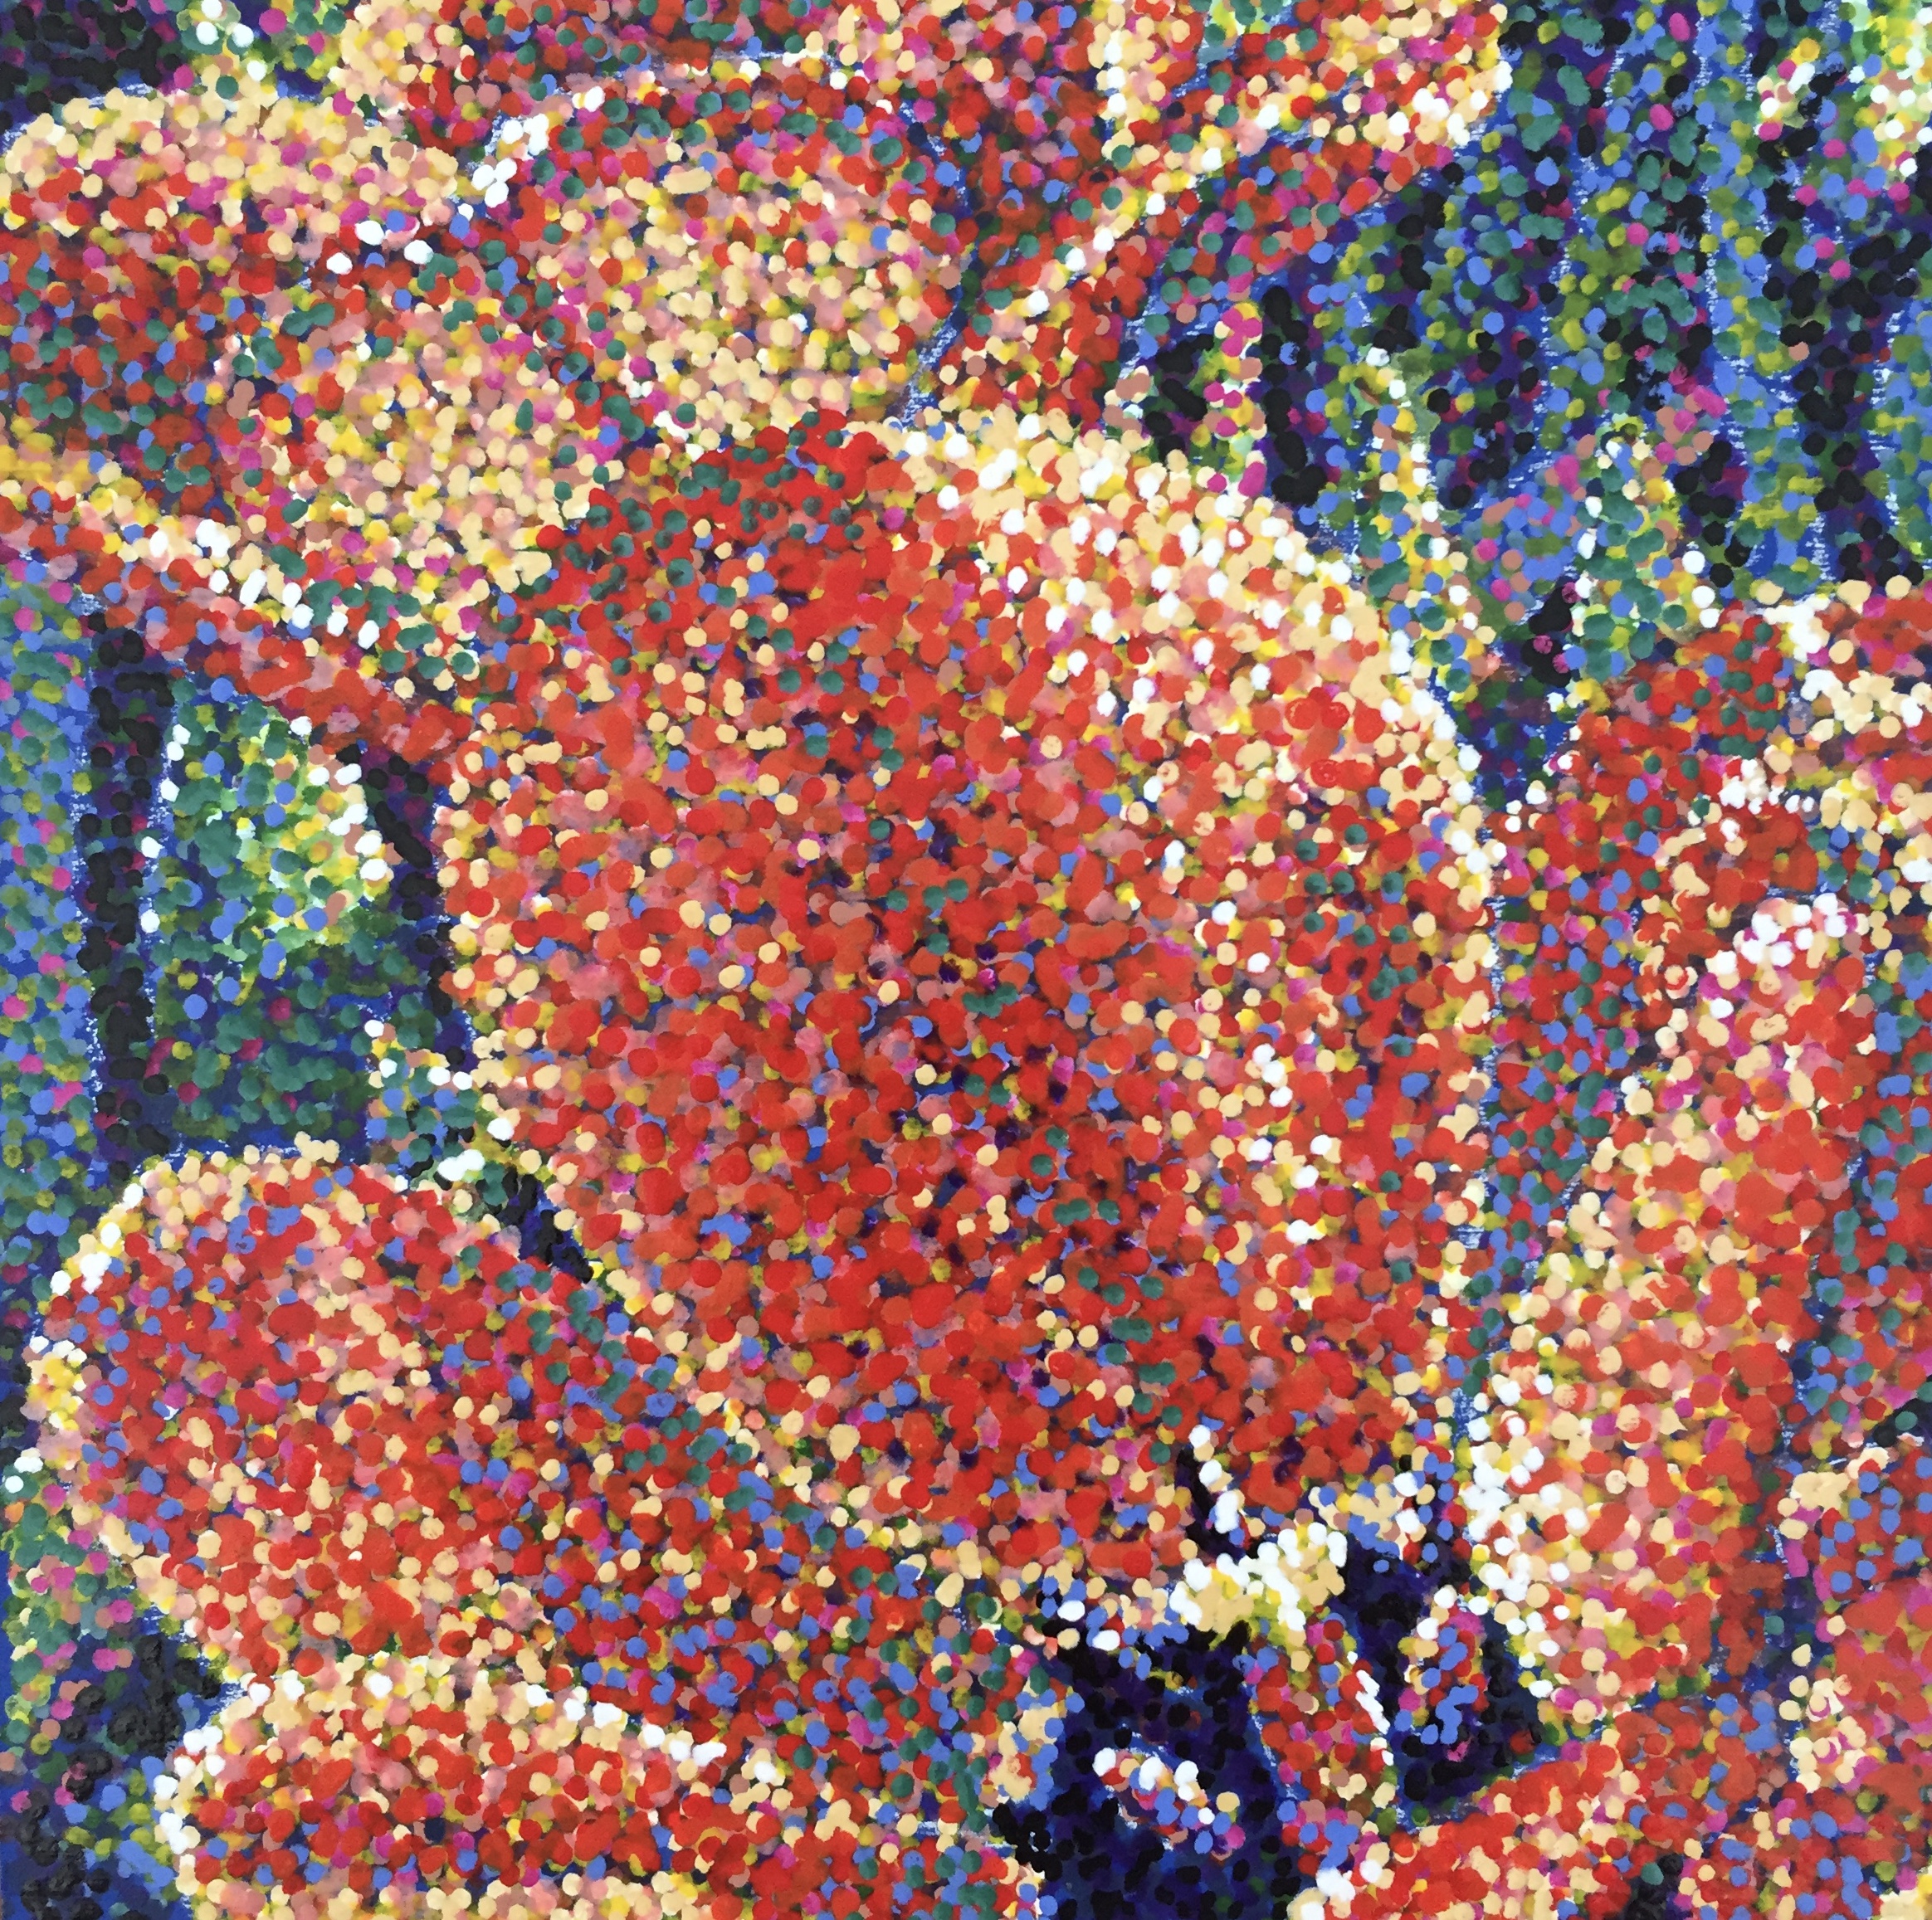 How to tell the difference between pointillism, stippling, dot art